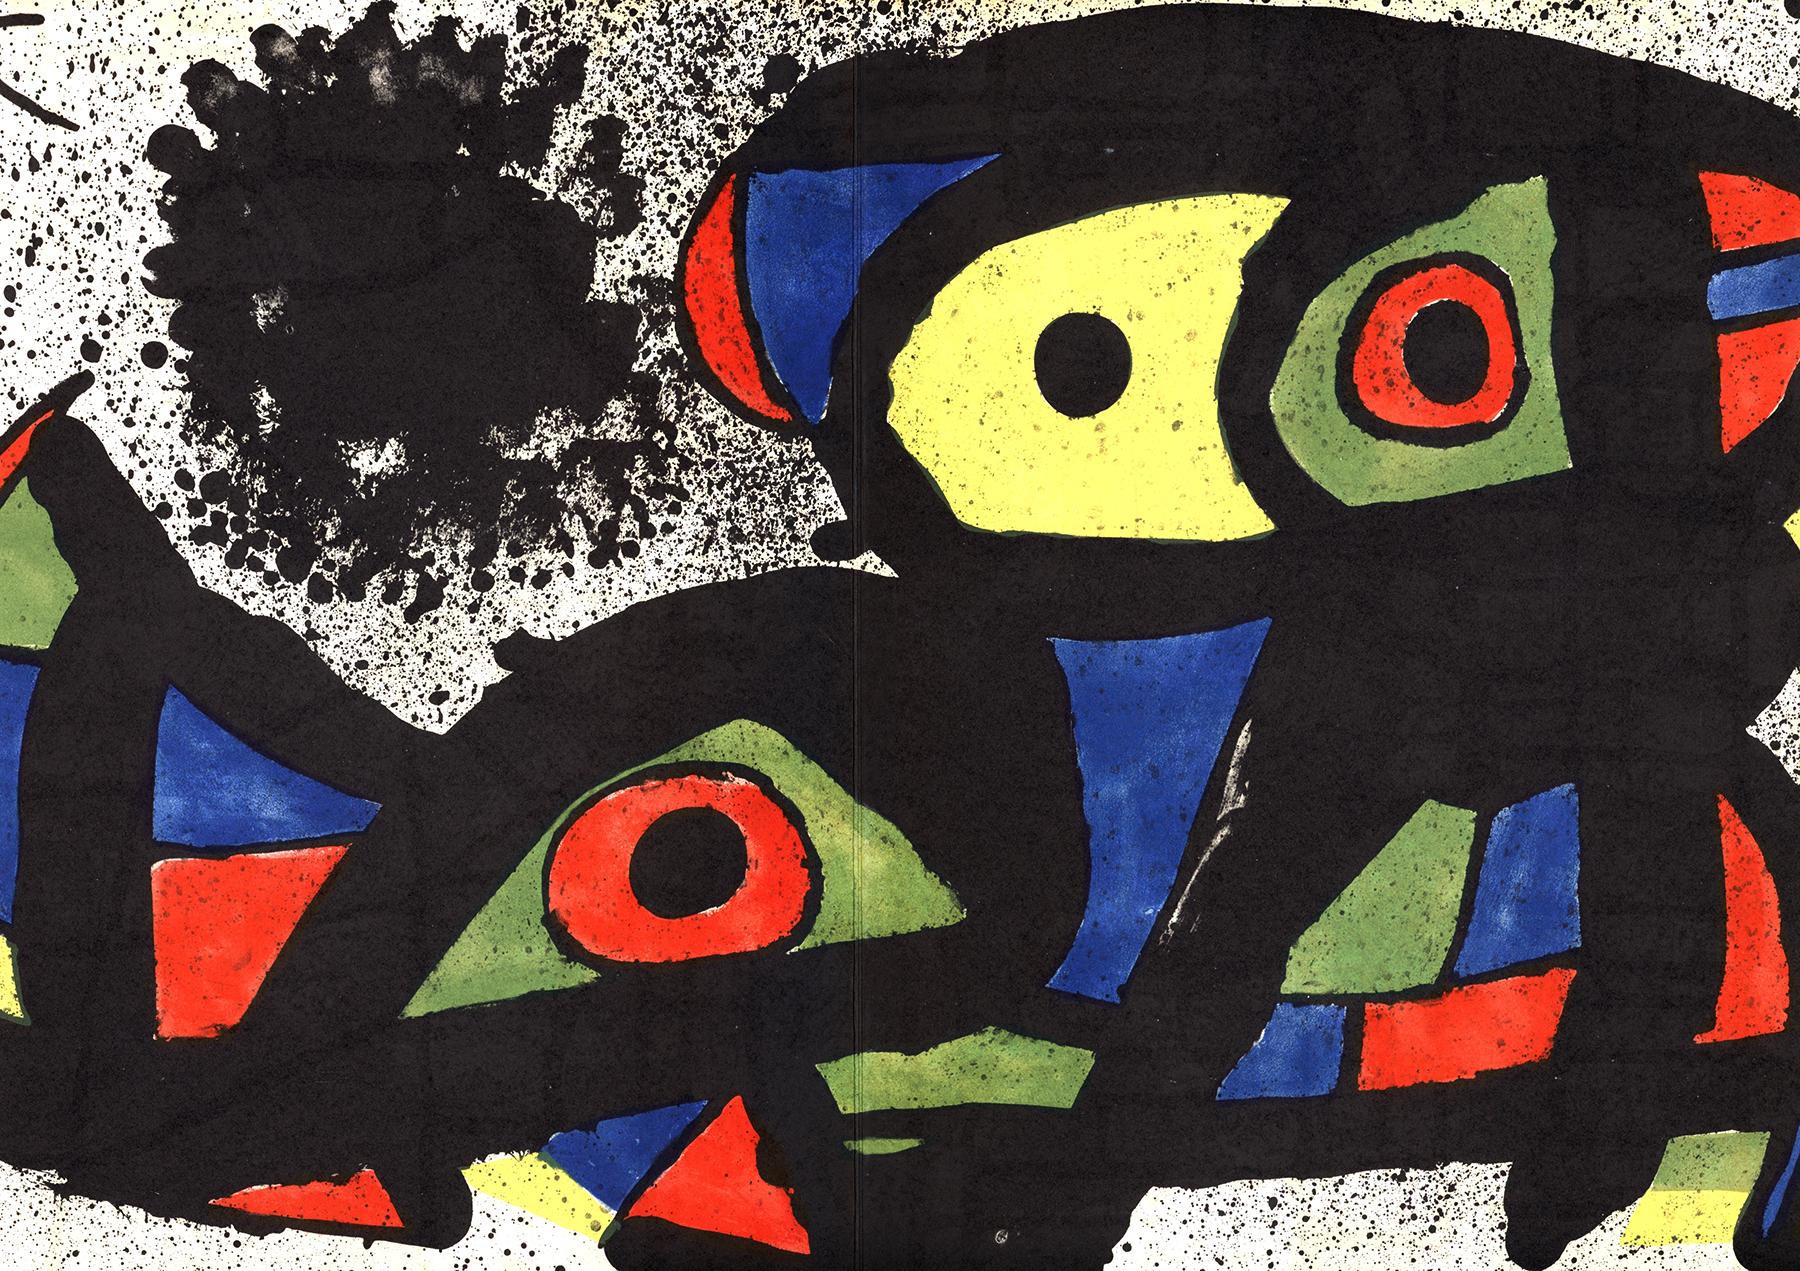 1970s Joan Miró Lithograph:
Lithographic insert from the 1979 exhibition catalog published on the occasion of Miro's exhibition at Maeght gallery, Paris.

12.5 x 17.75 inches. 

Very good overall vintage condition; minor signs of aging; contains a